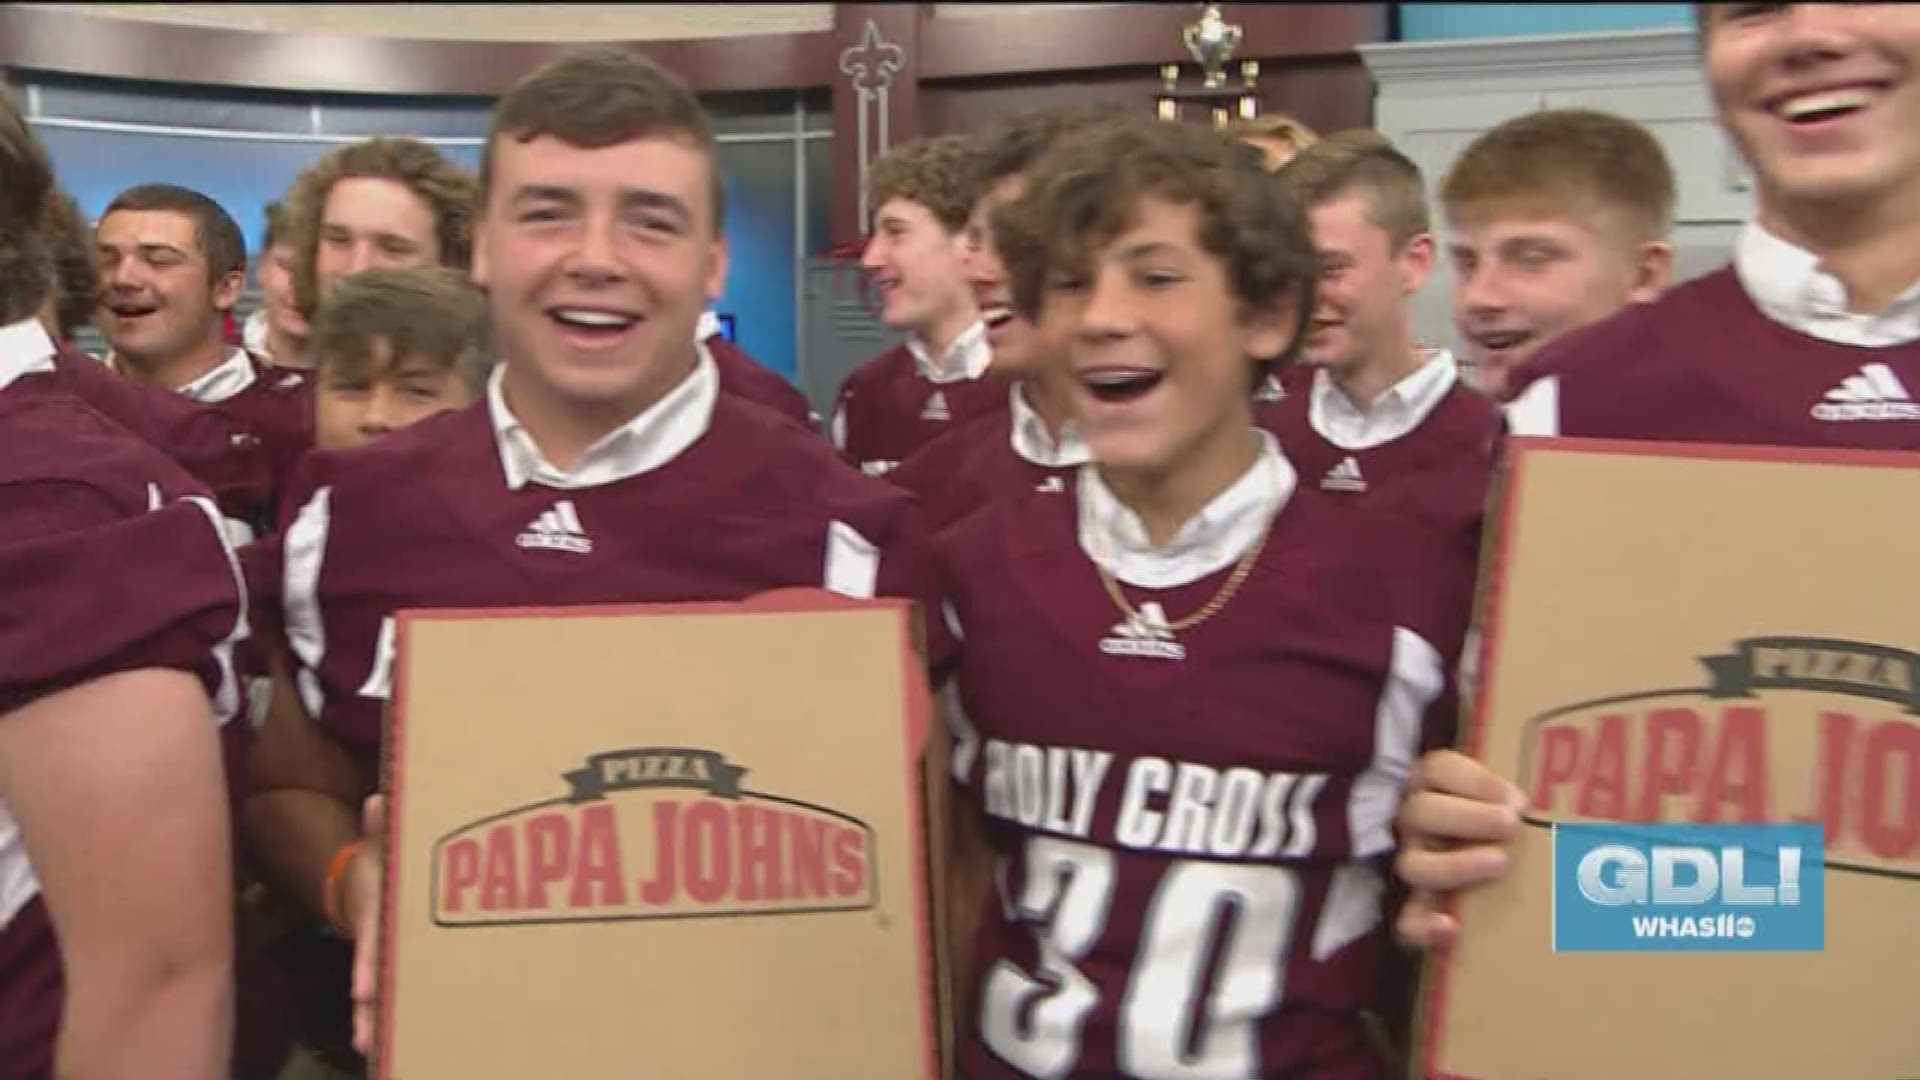 Tune into WHAS11's HS GameTime delivered by Papajohns.com at 11 PM Friday, September 21, 2018 for highlights from the game. To get a 2 topping X-tra large pizza for $11, just go to papajohns.com and enter promo code  HSFB11.